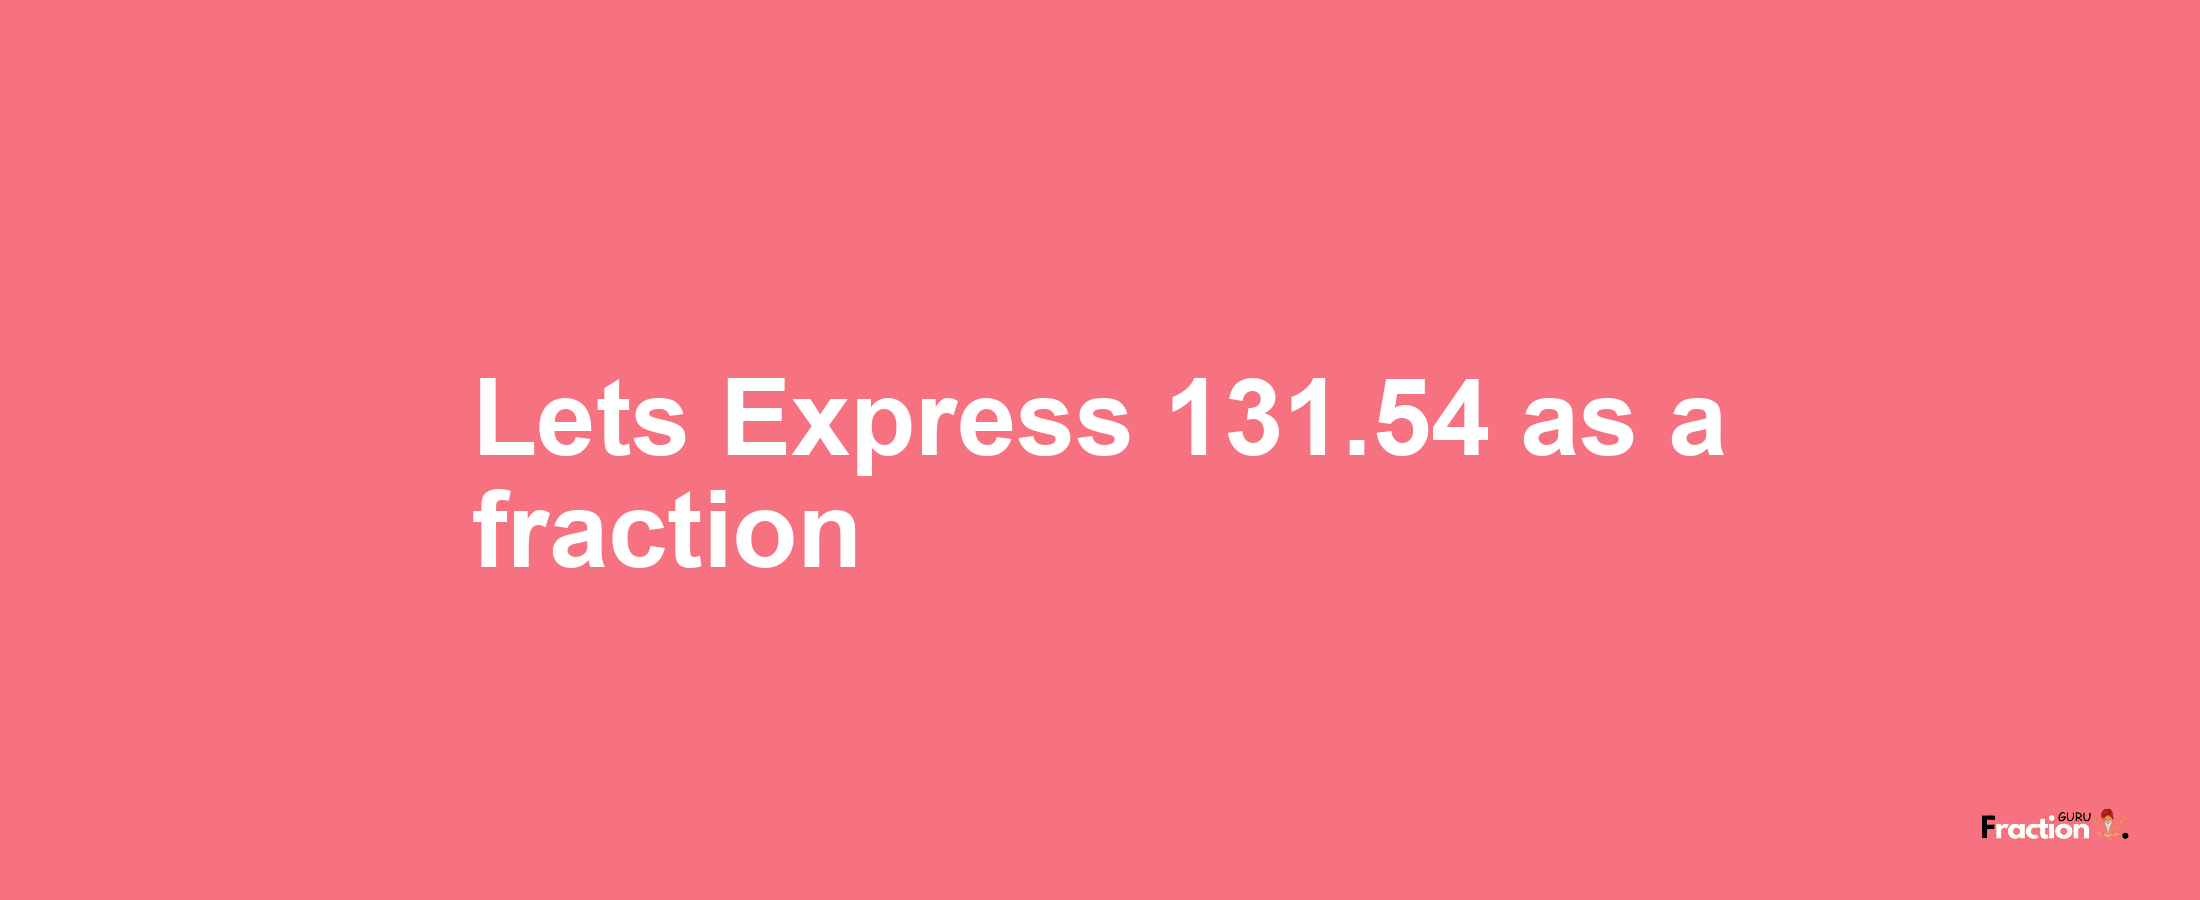 Lets Express 131.54 as afraction